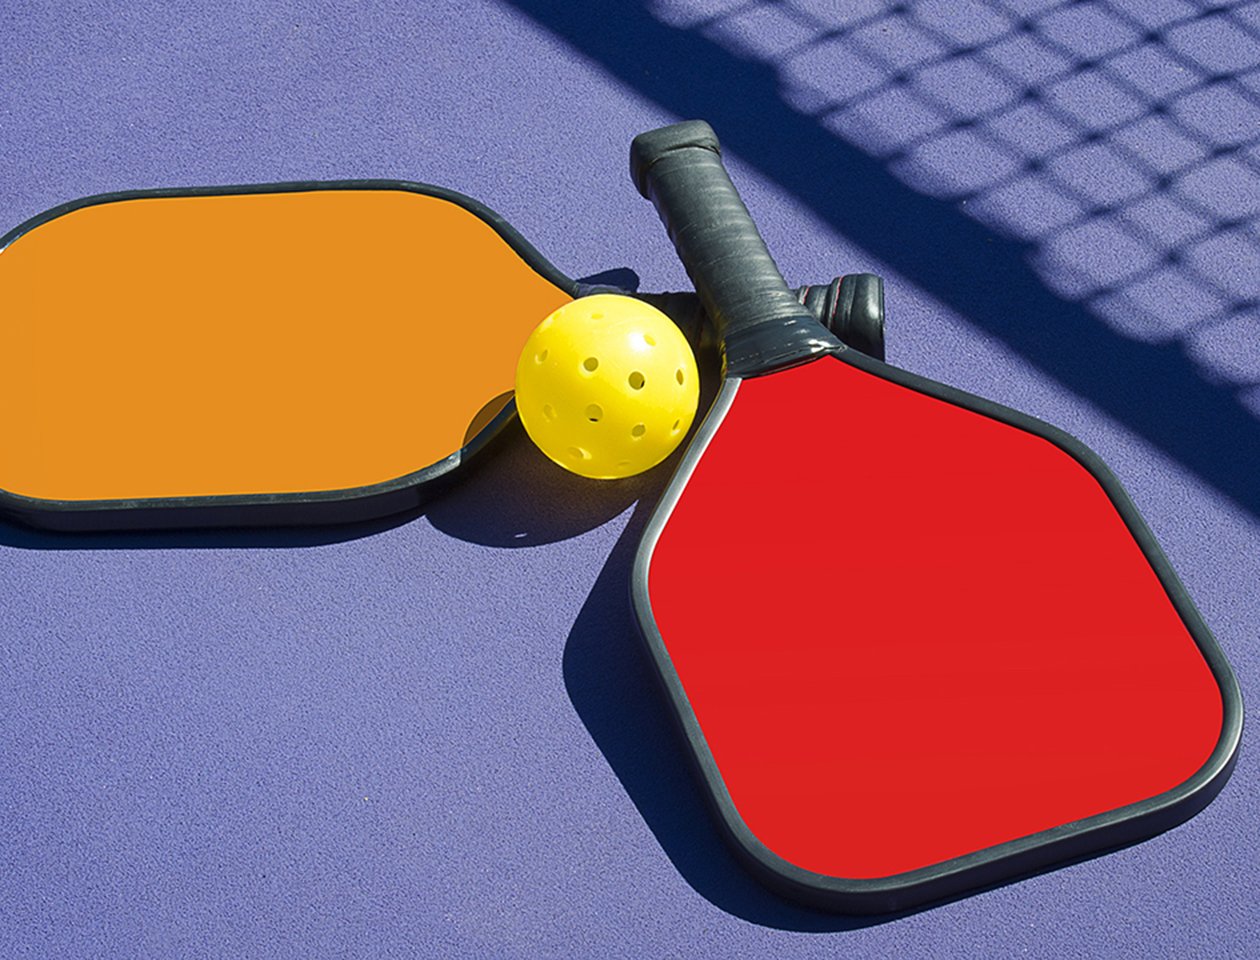 Image of 2 Pickleball paddles and a pickleball laying on pickleball court with net shadow.